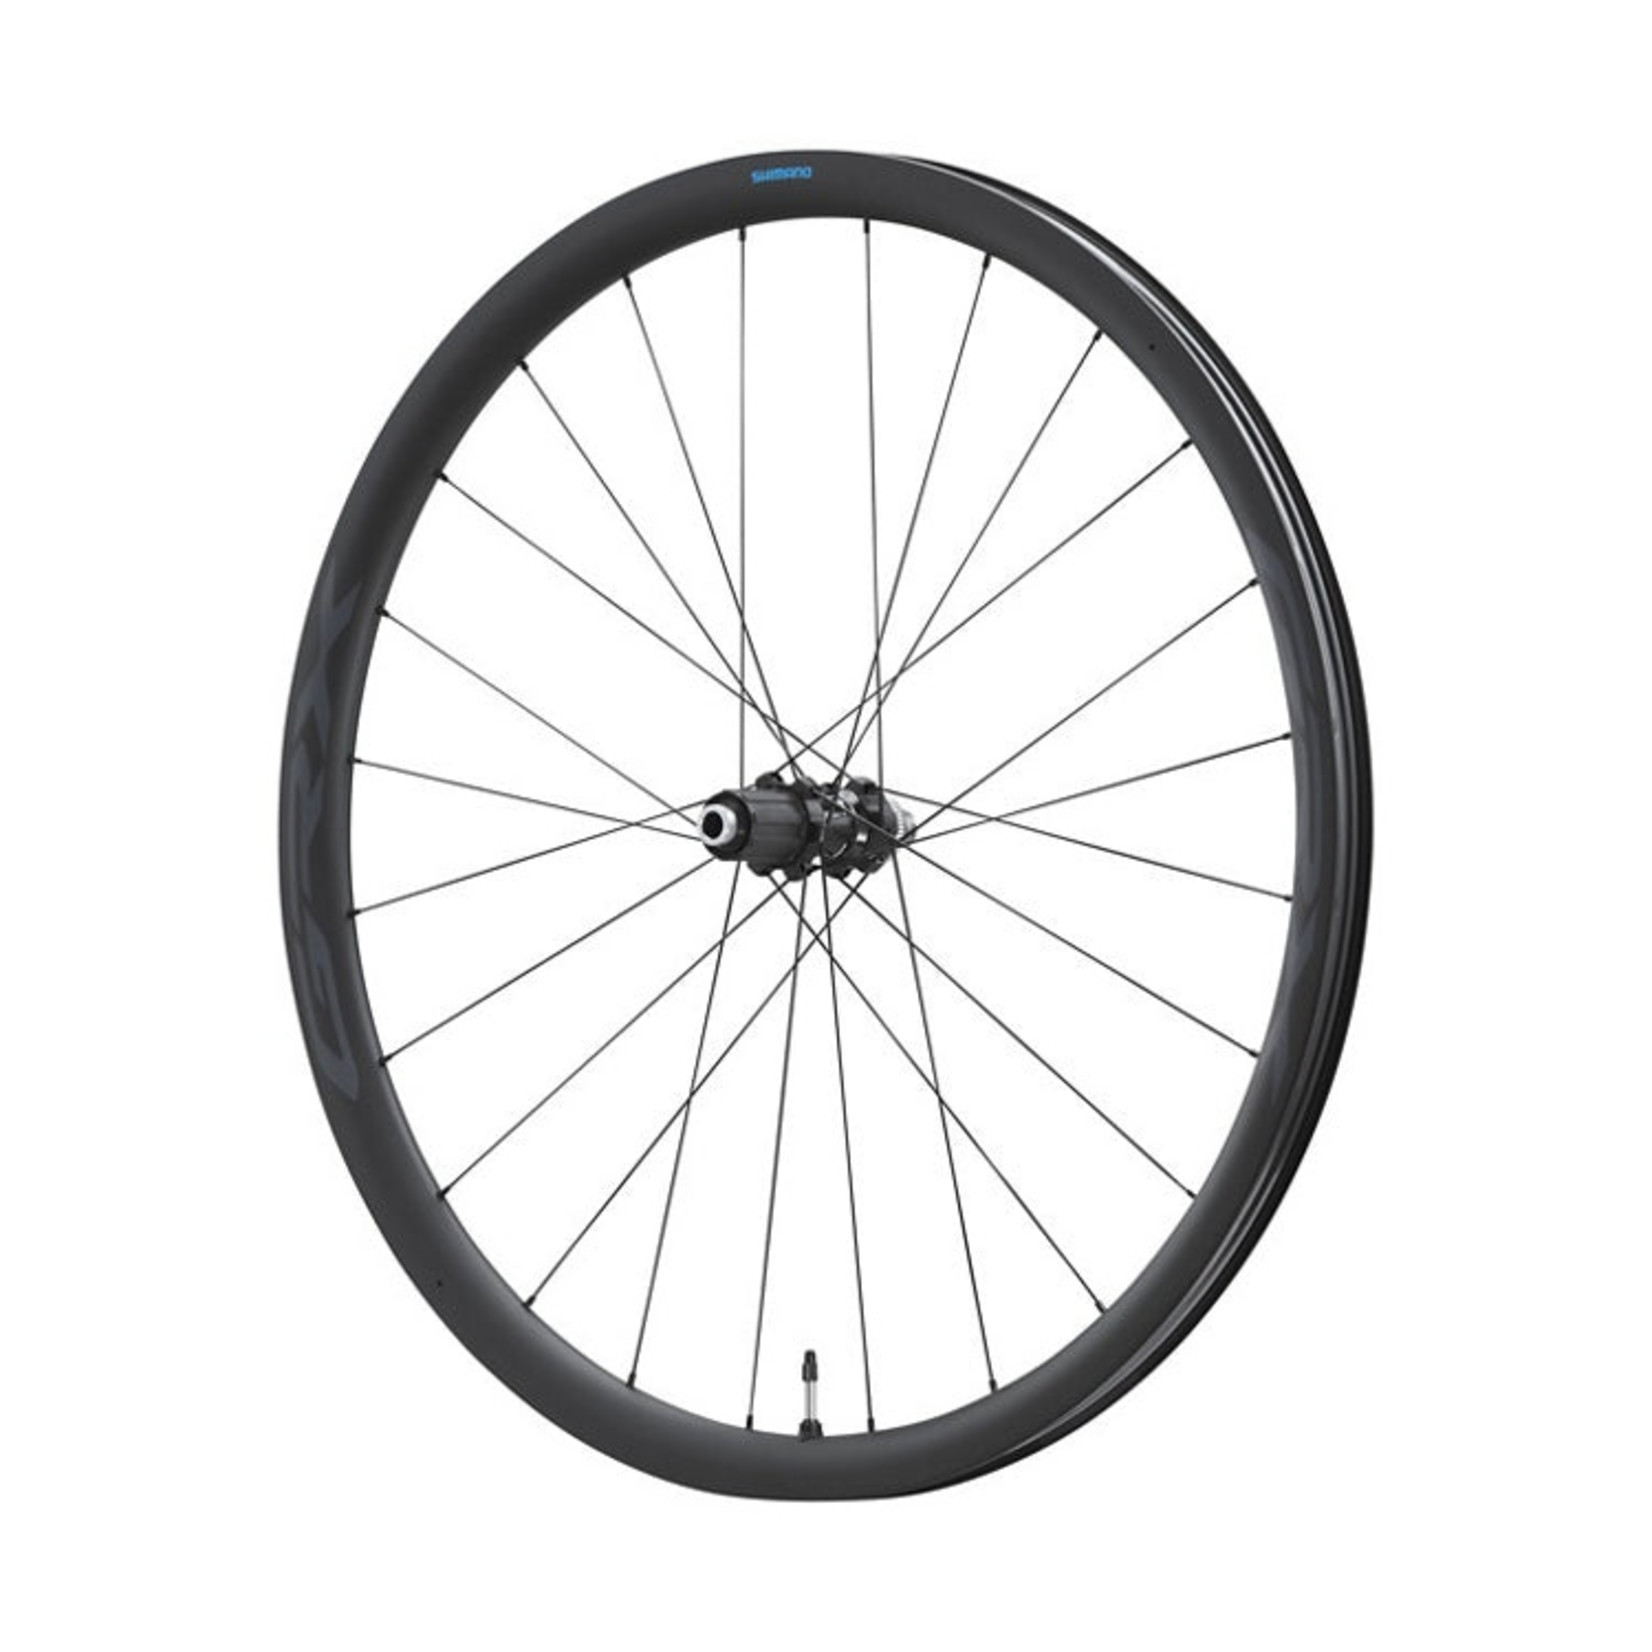 Shimano GRX Wheelset, WH-RX870-700C, FRONT & REAR, 24H, FOR 11/12-Speed, 12mm x 100/142mm TA, TUBELESS CL